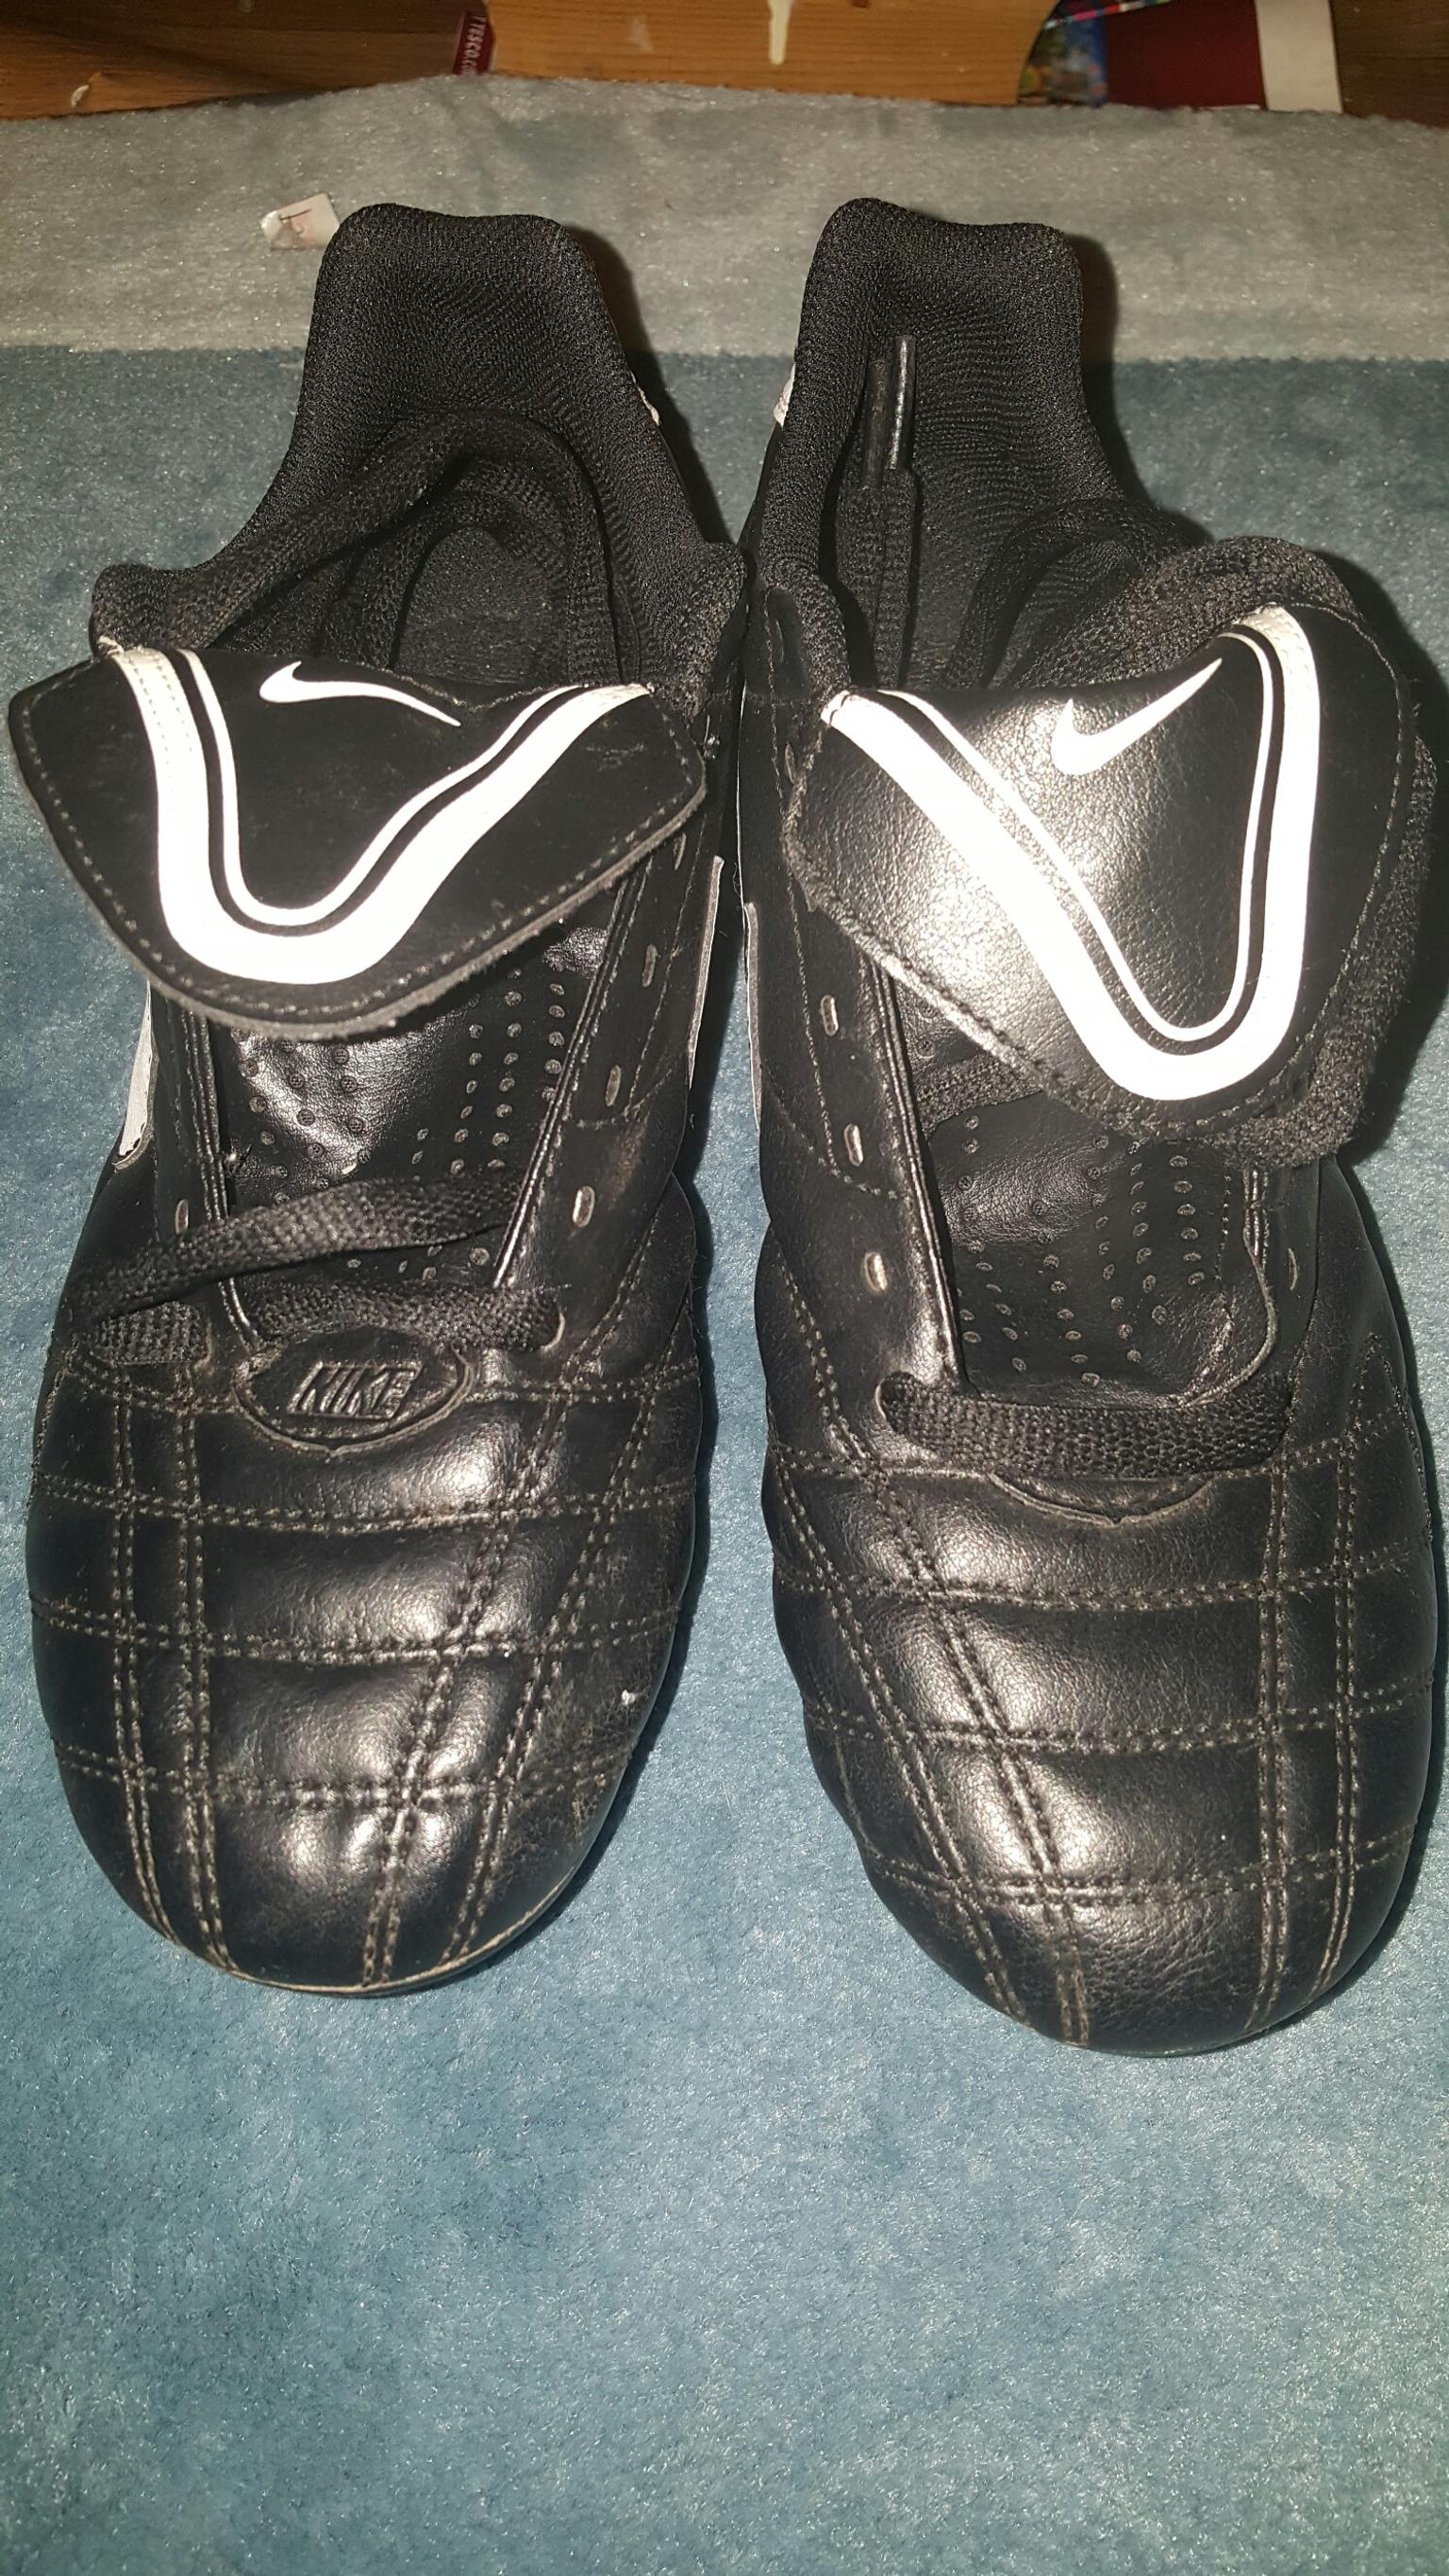 Nike TIEMPO est.1984 in M18 Manchester for £30.00 for sale | Shpock